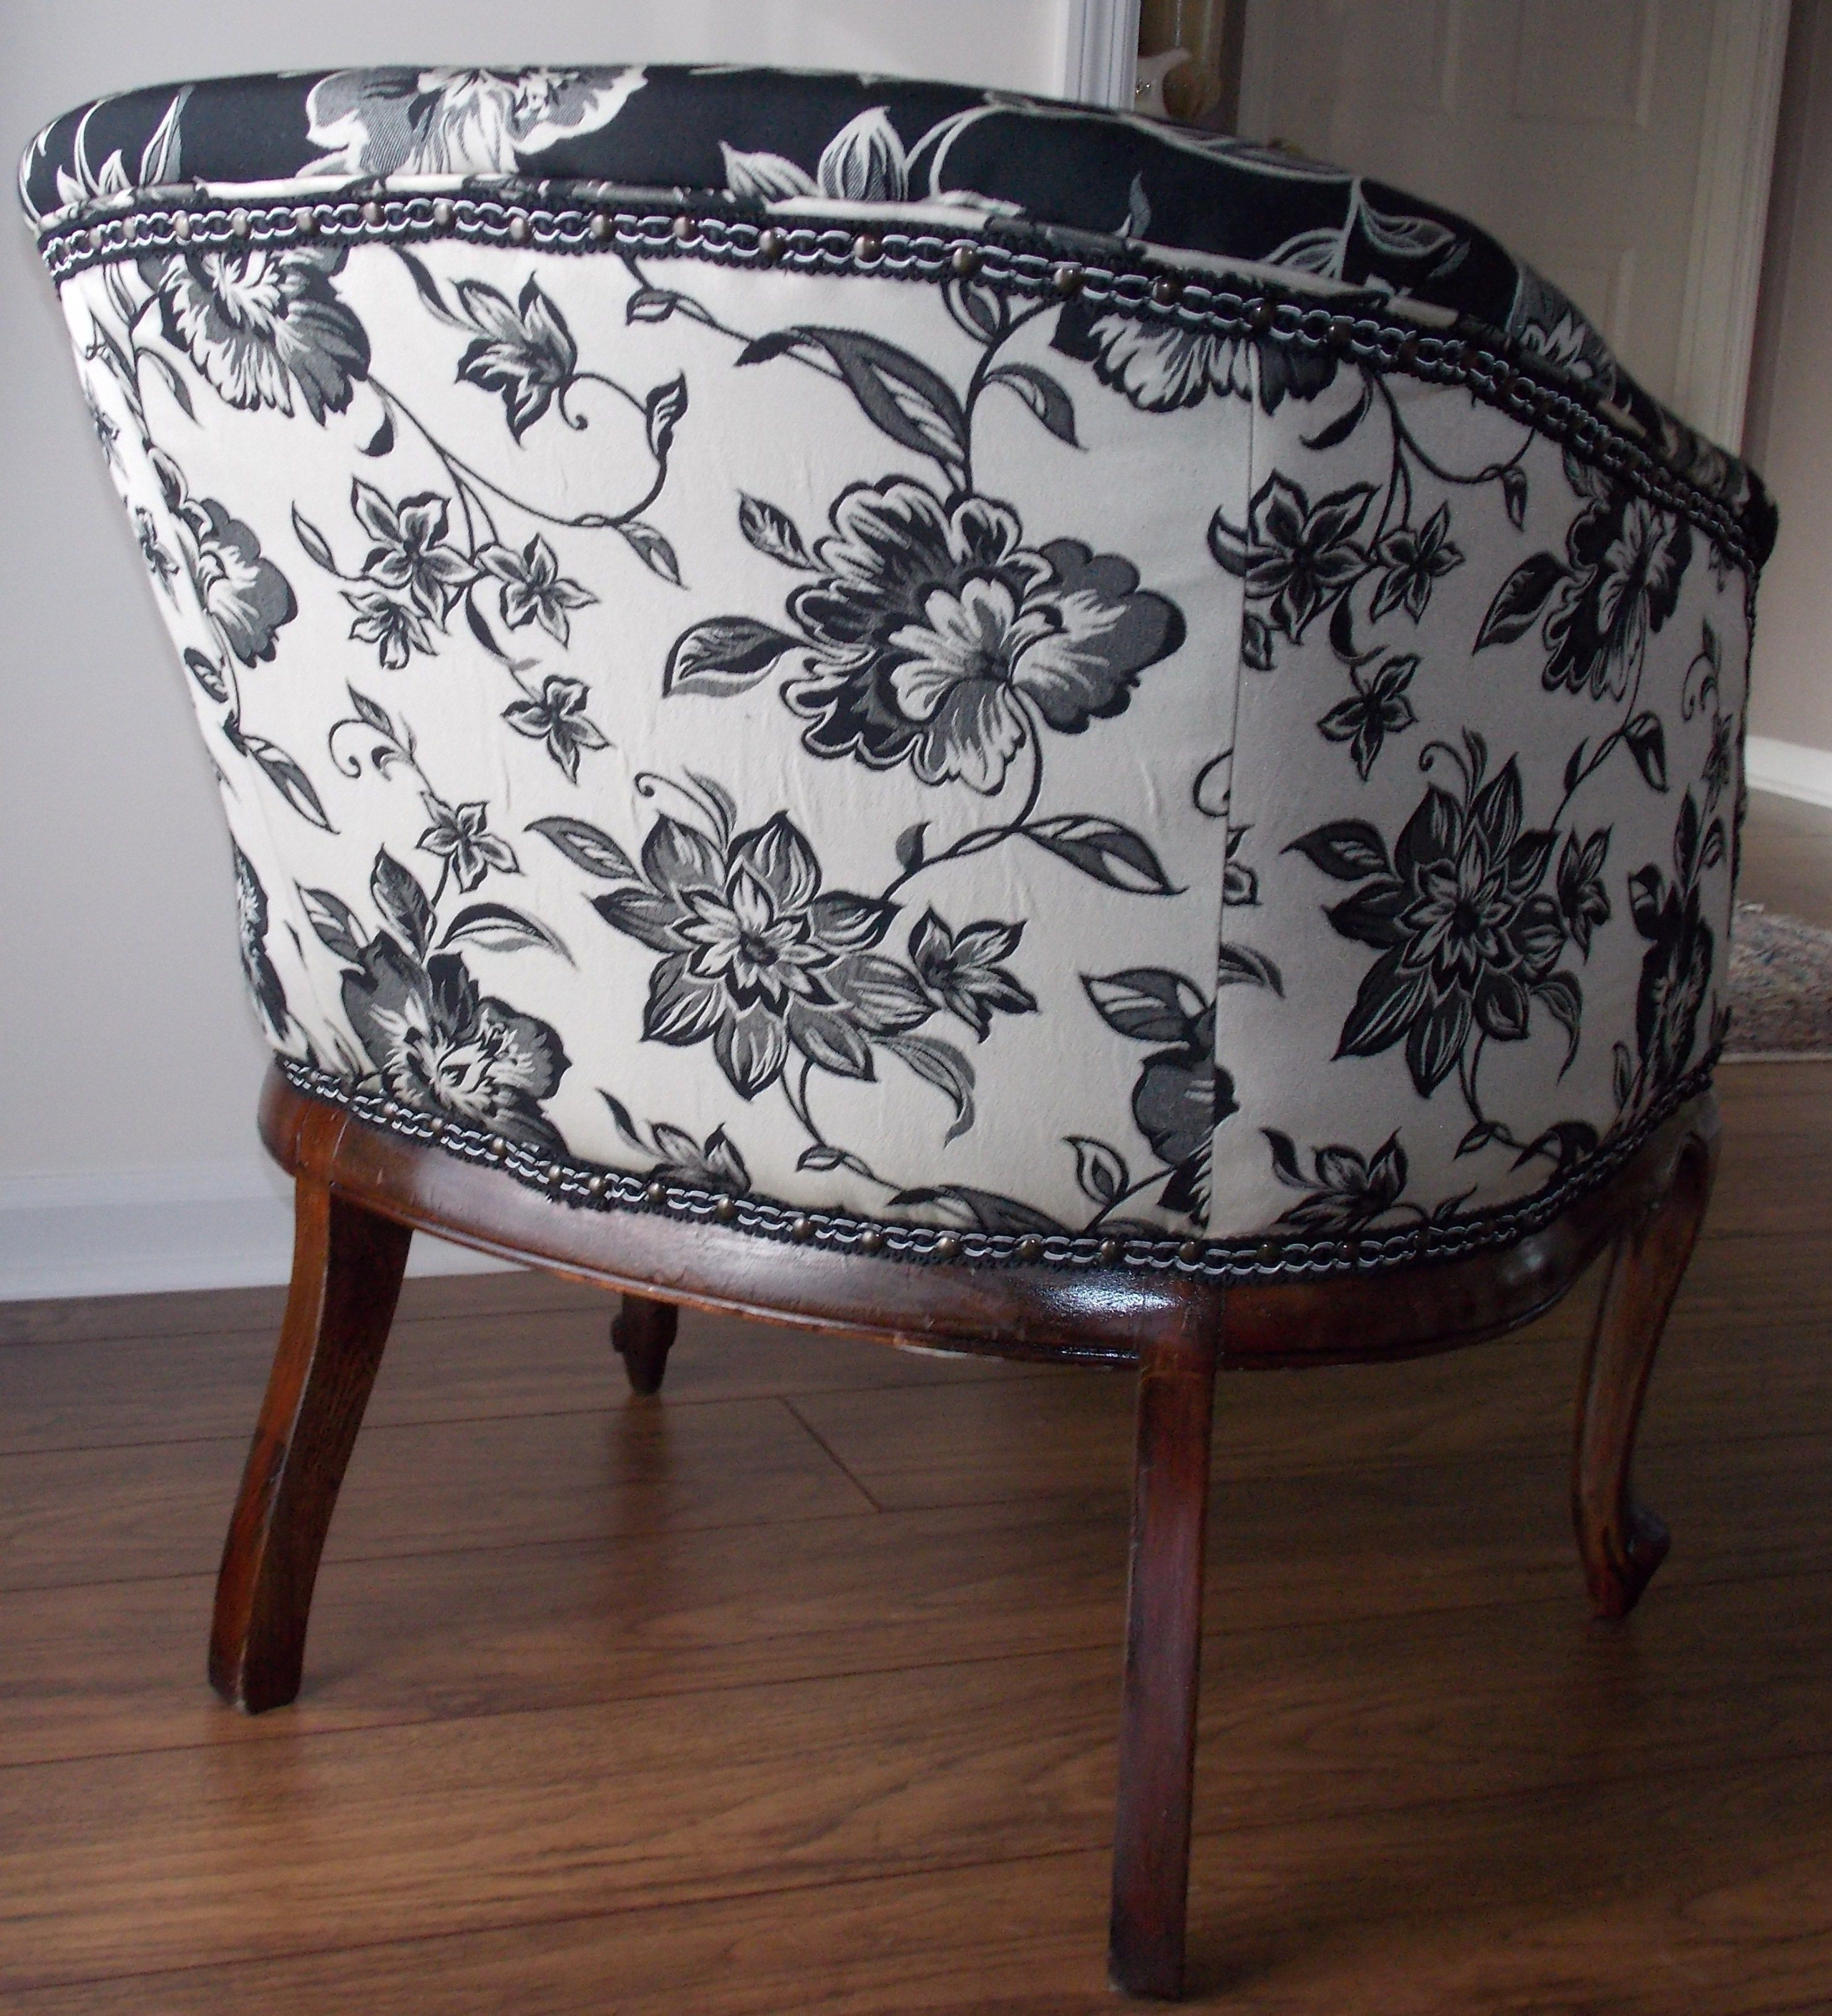 Barrel Chairs For Sale - Ideas on Foter